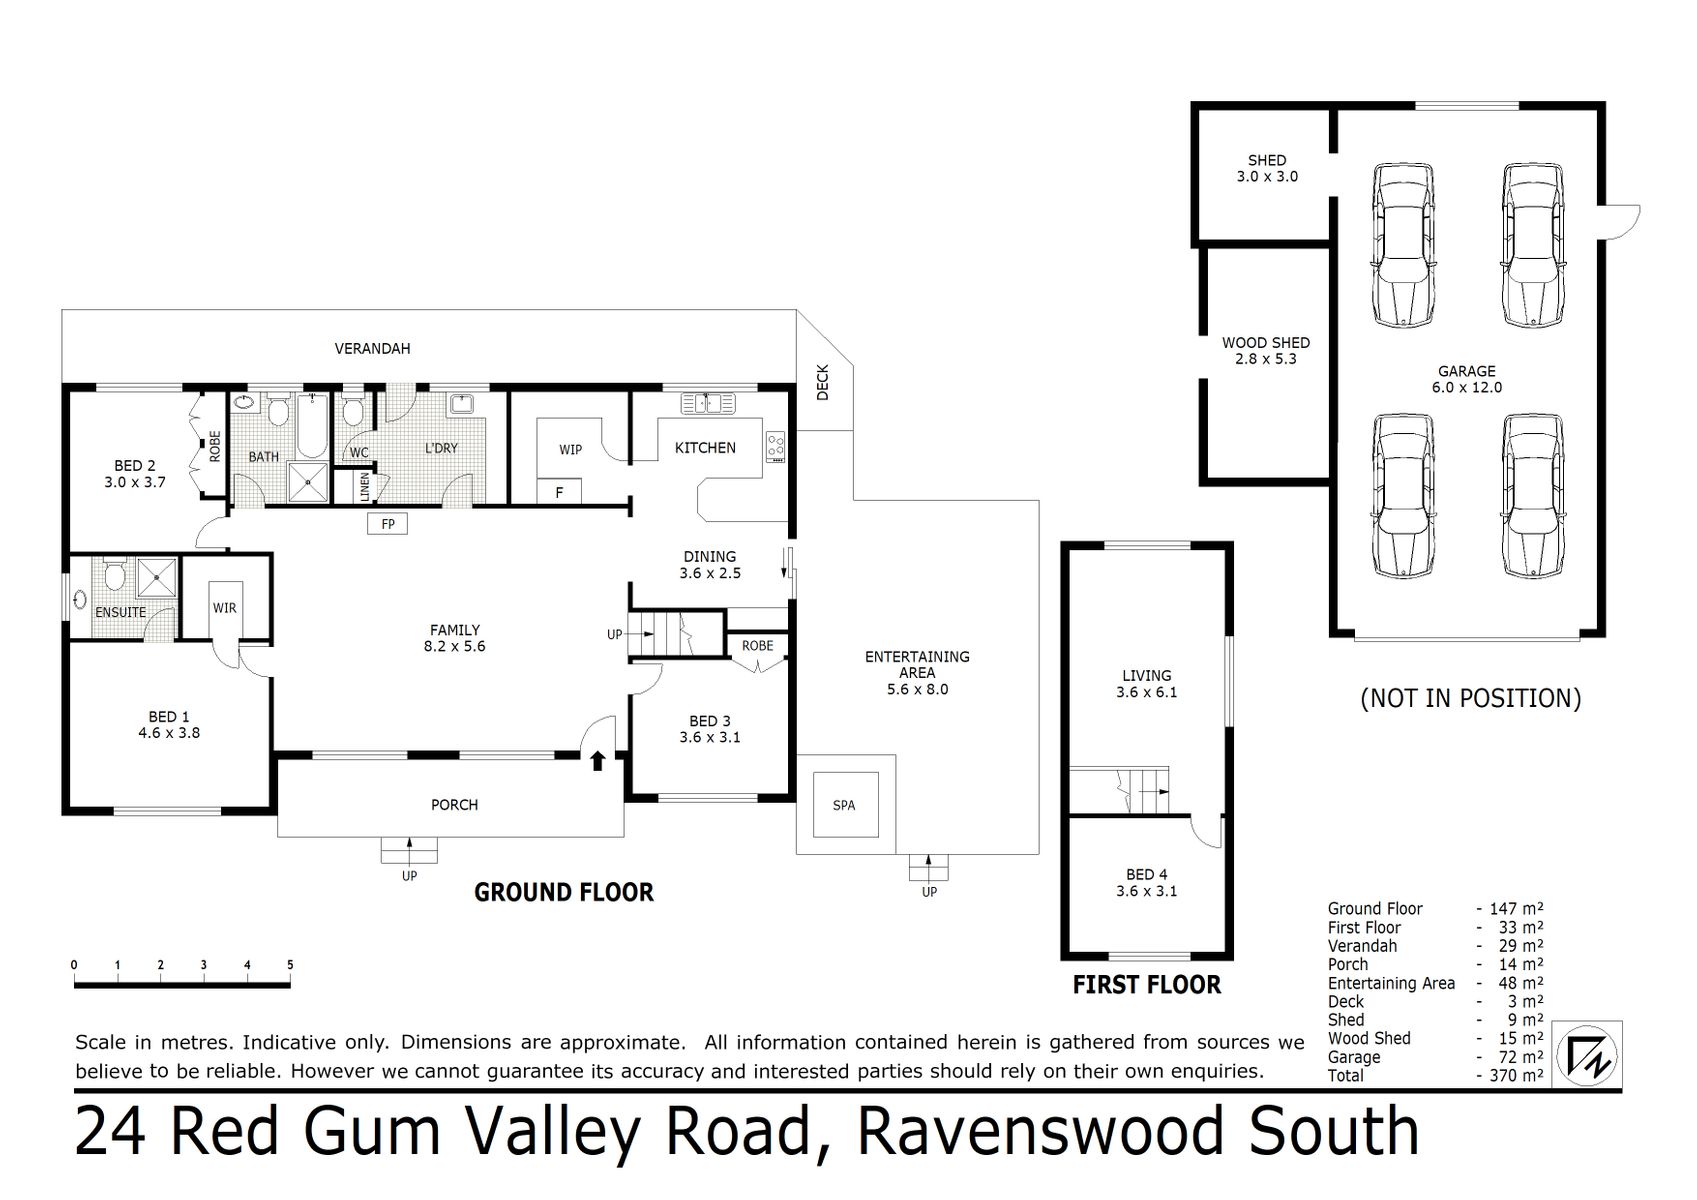 24 Red Gum Valley Road Ravenswood South (01 APR 2021) 180sqm (2)